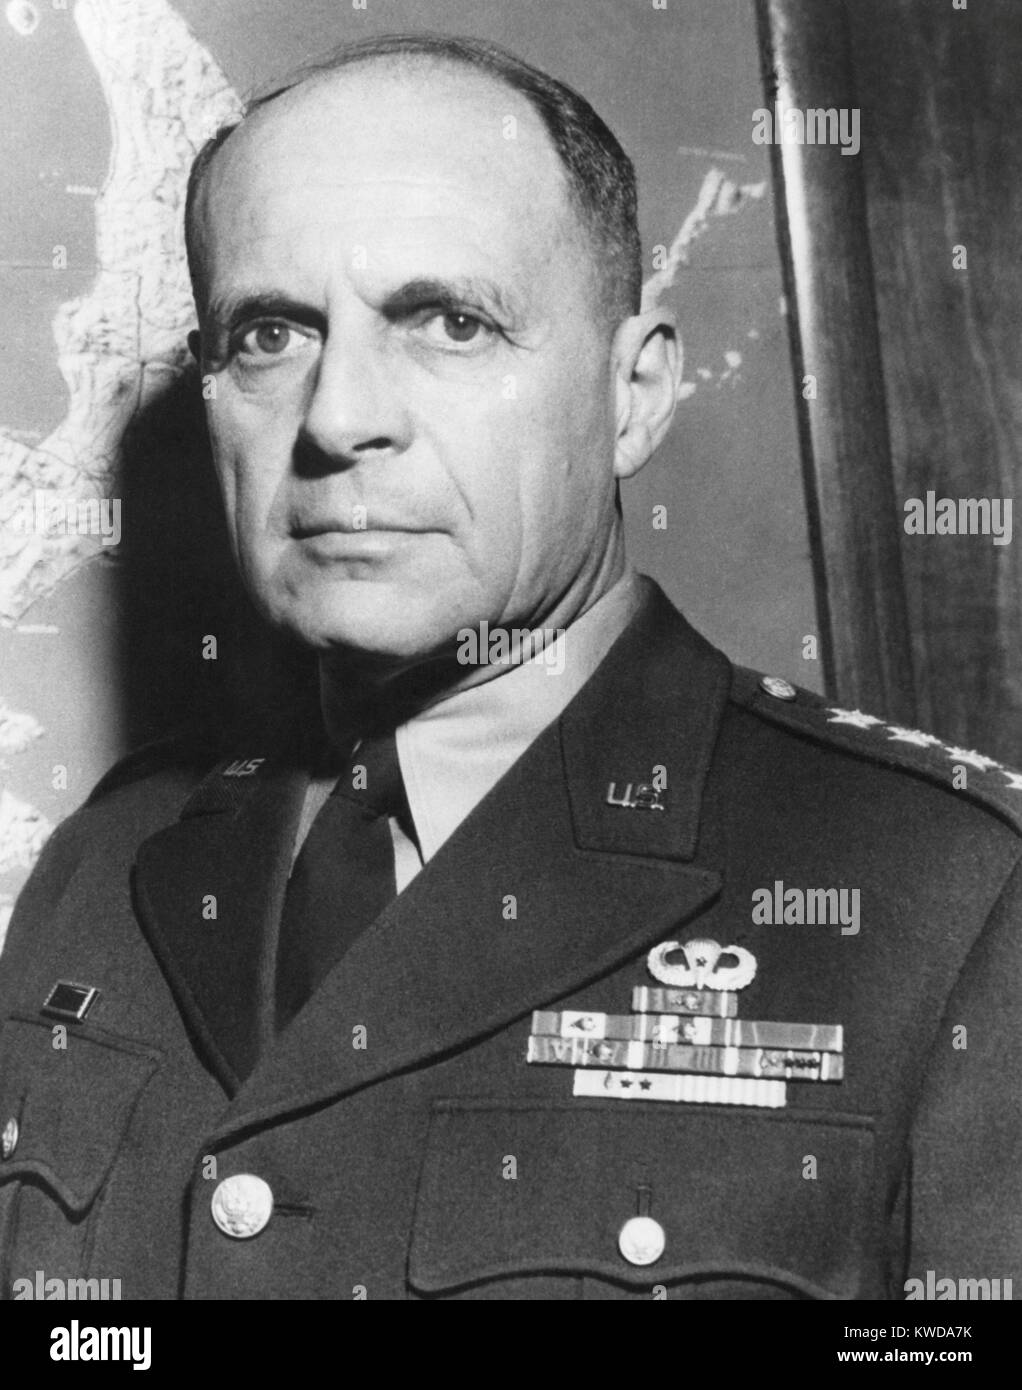 General Matthew Ridgeway, as a four star General standing in front of a map of Japan. In April 1951 he replaced Gen. Douglas MacArthur as Commander of UN forces in Korea and as Military Governor of Japan. He oversaw the restoration of Japan's sovereignty (BSLOC 2016 7 28) Stock Photo